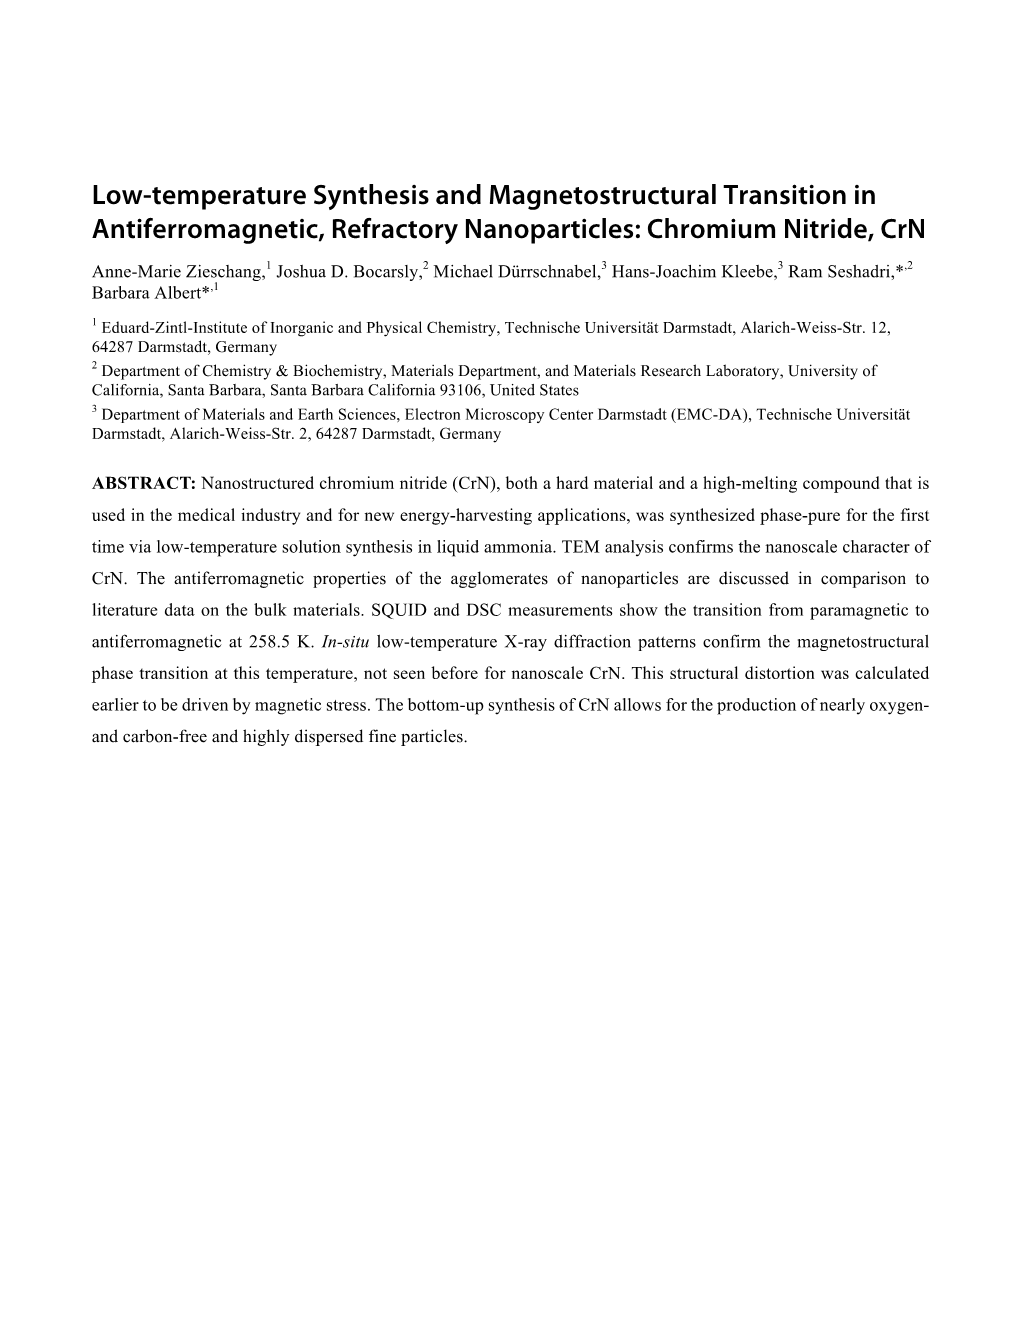 Low-Temperature Synthesis and Magnetostructural Transition in Antiferromagnetic, Refractory Nanoparticles: Chromium Nitride